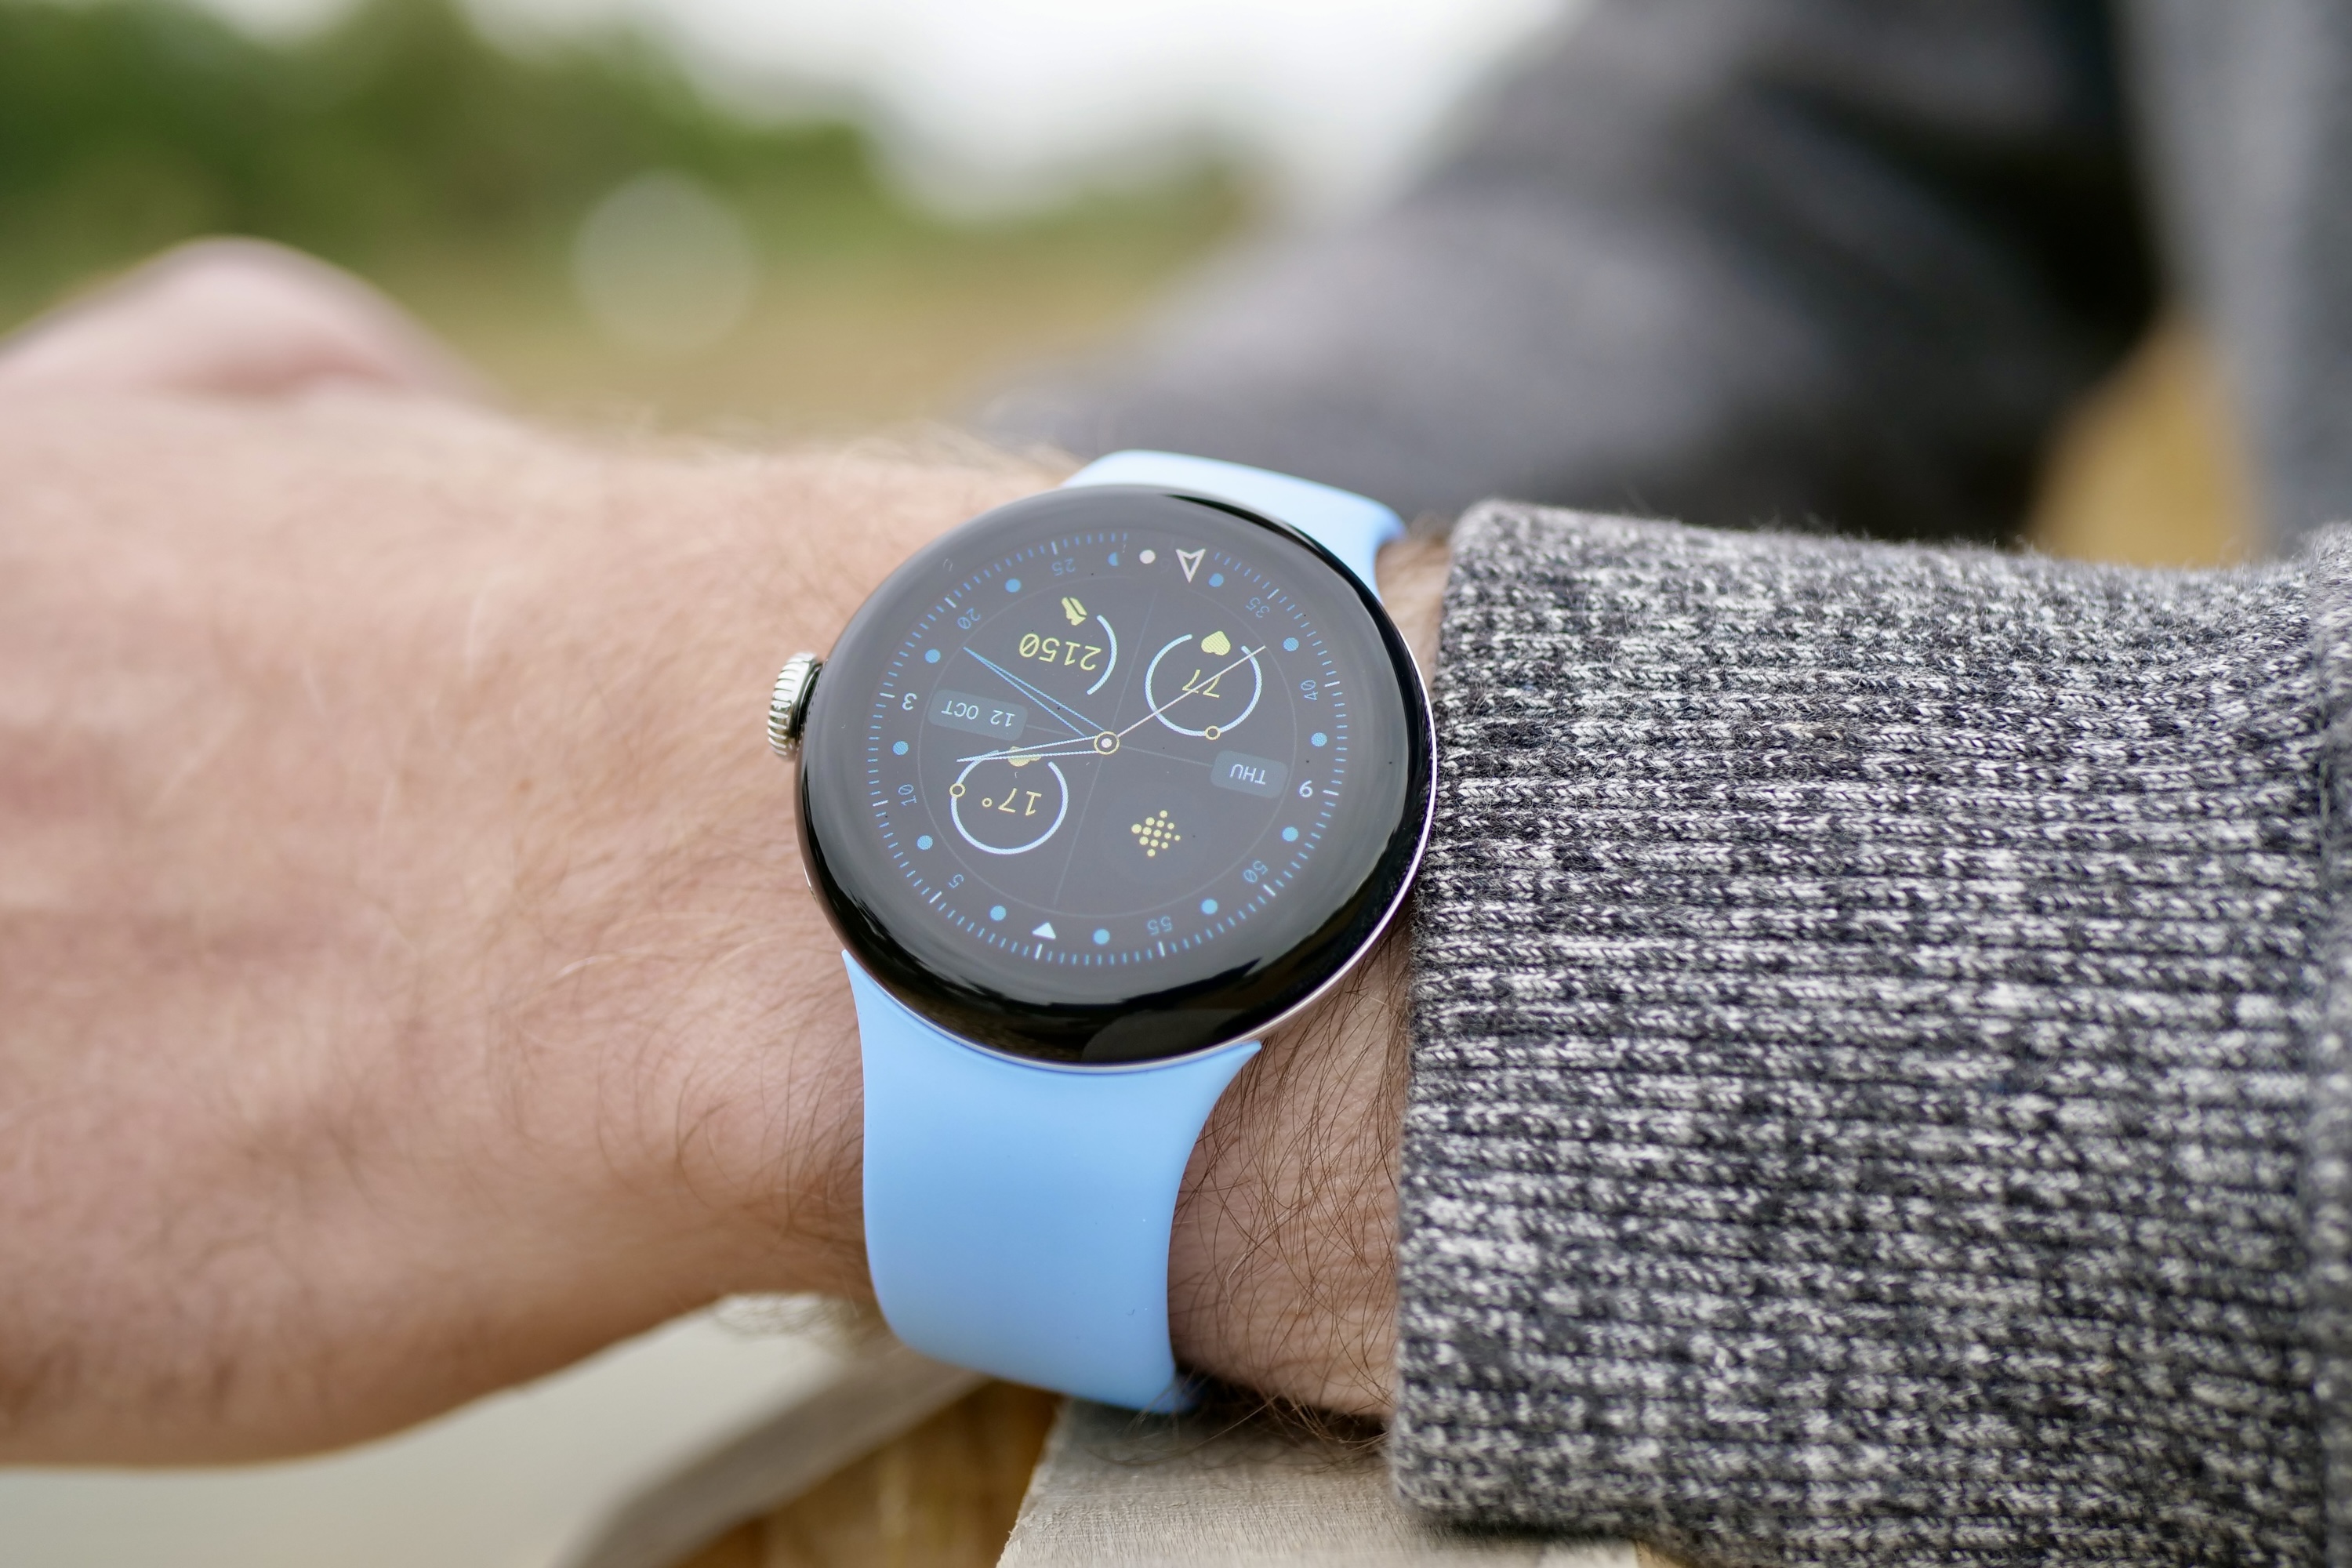 Google Pixel Watch review: Not the Apple Watch of Android (yet